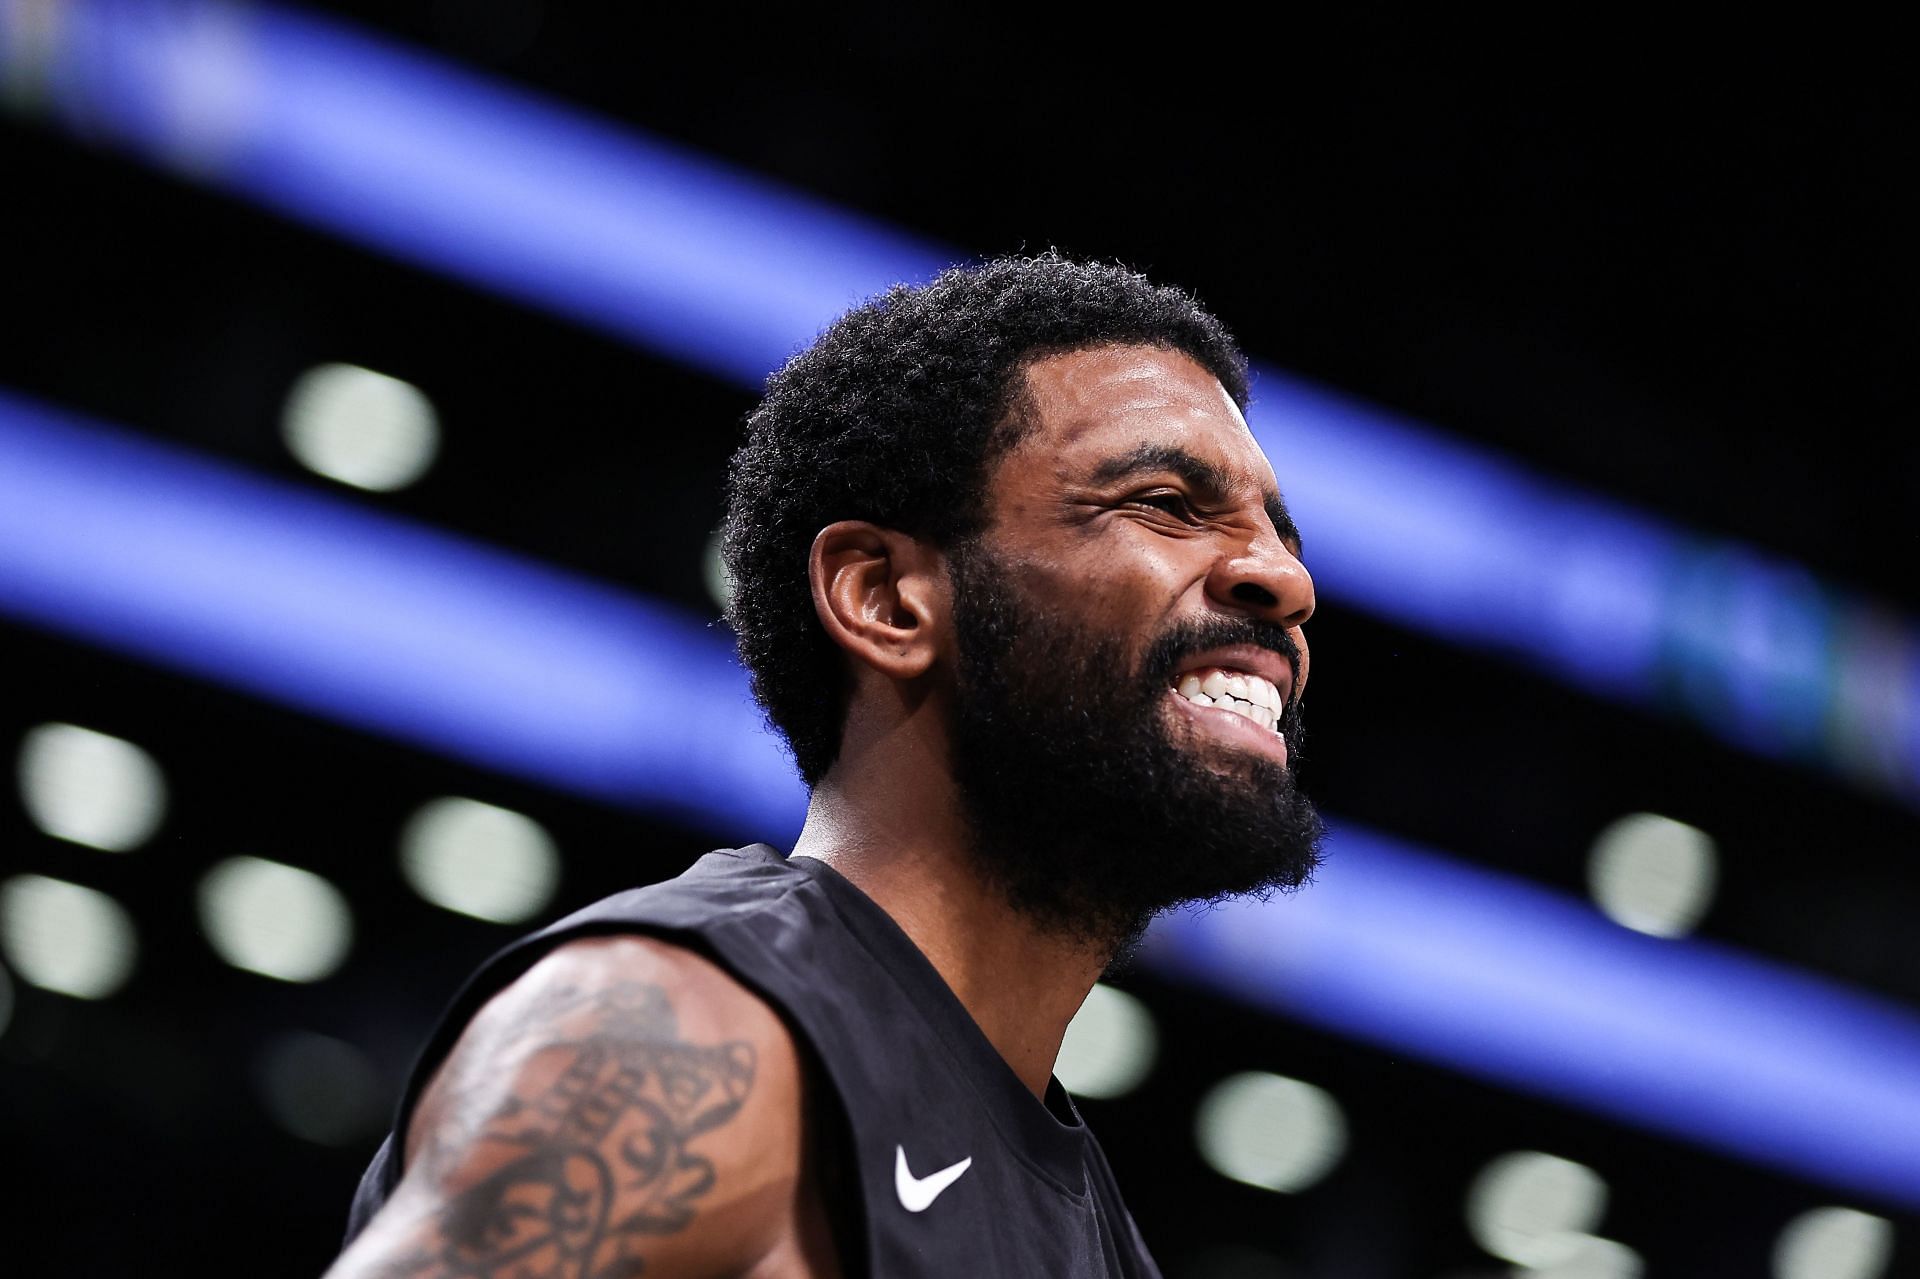 Kyrie Irving is playing the final year of his contract with the Brooklyn Nets.